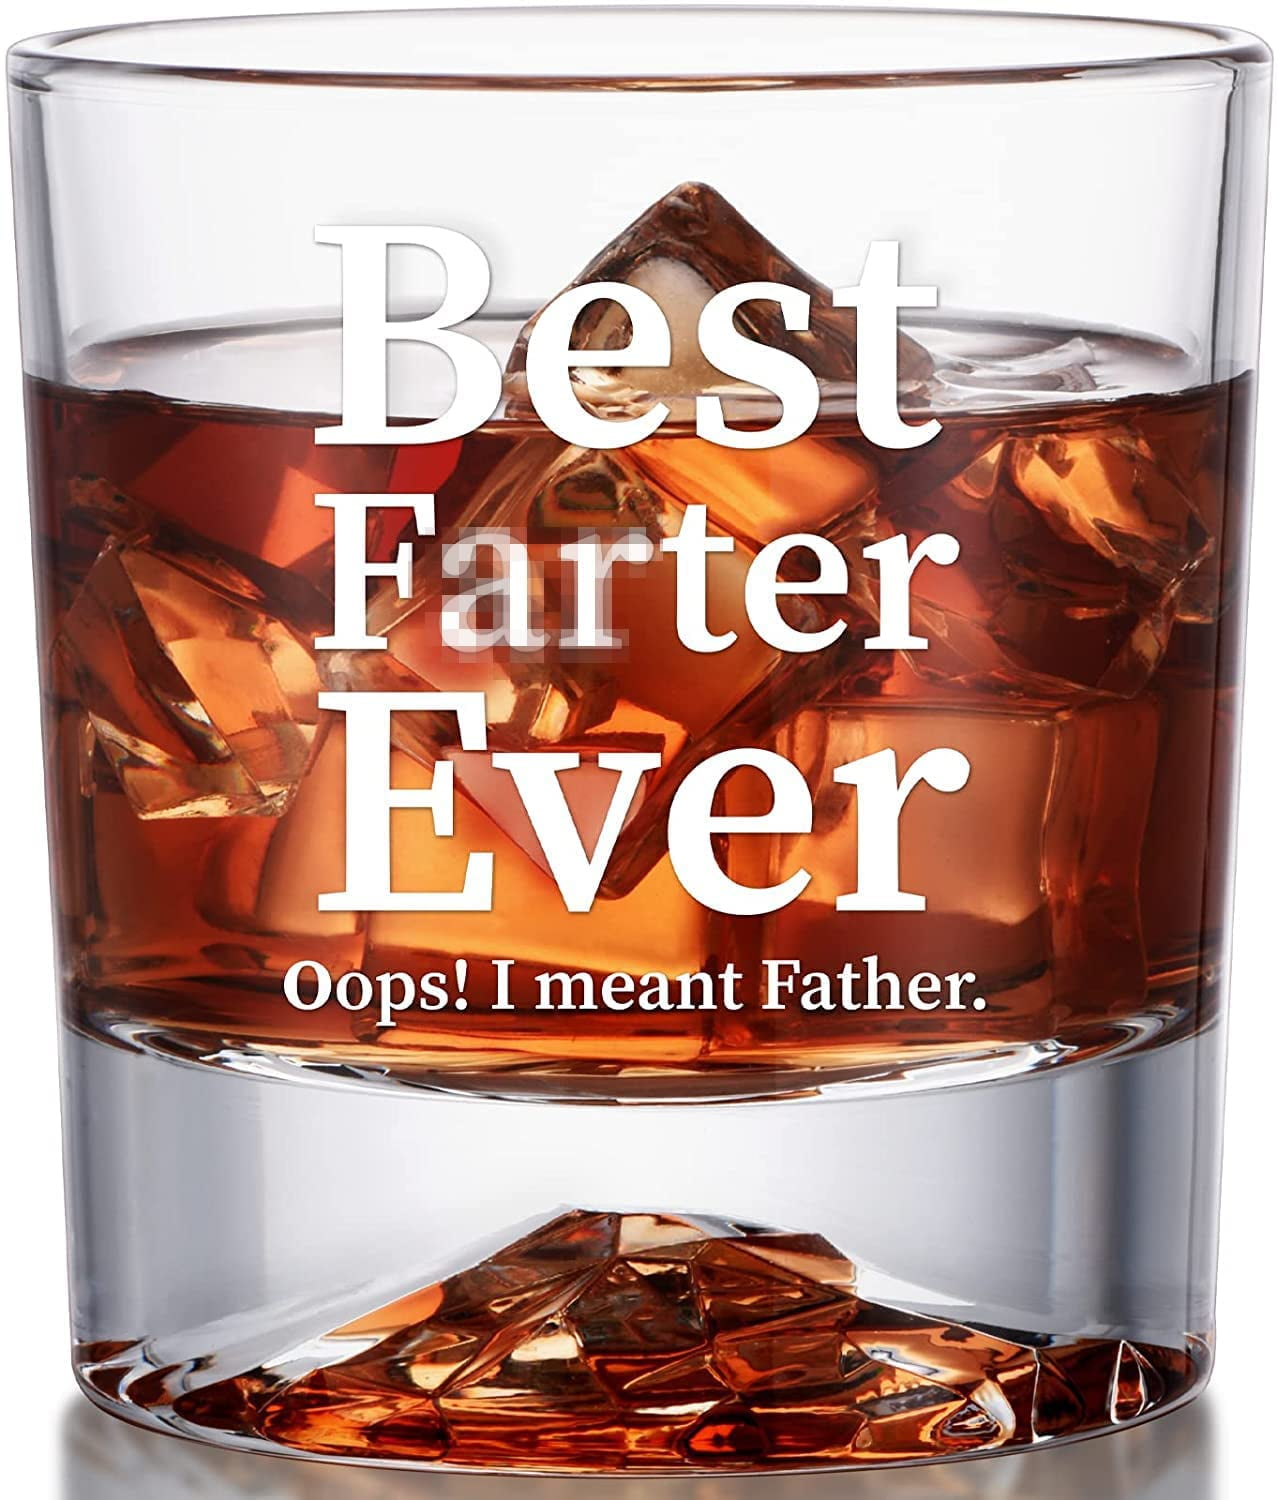 Dad Cool Stuff Gift Ideas for Him Son Grandpa Guy Gifts- Funny Gag Gifts for Men 11oz Scotch Whisky Whiskey Bourbon Liquor Glass Brother Guys